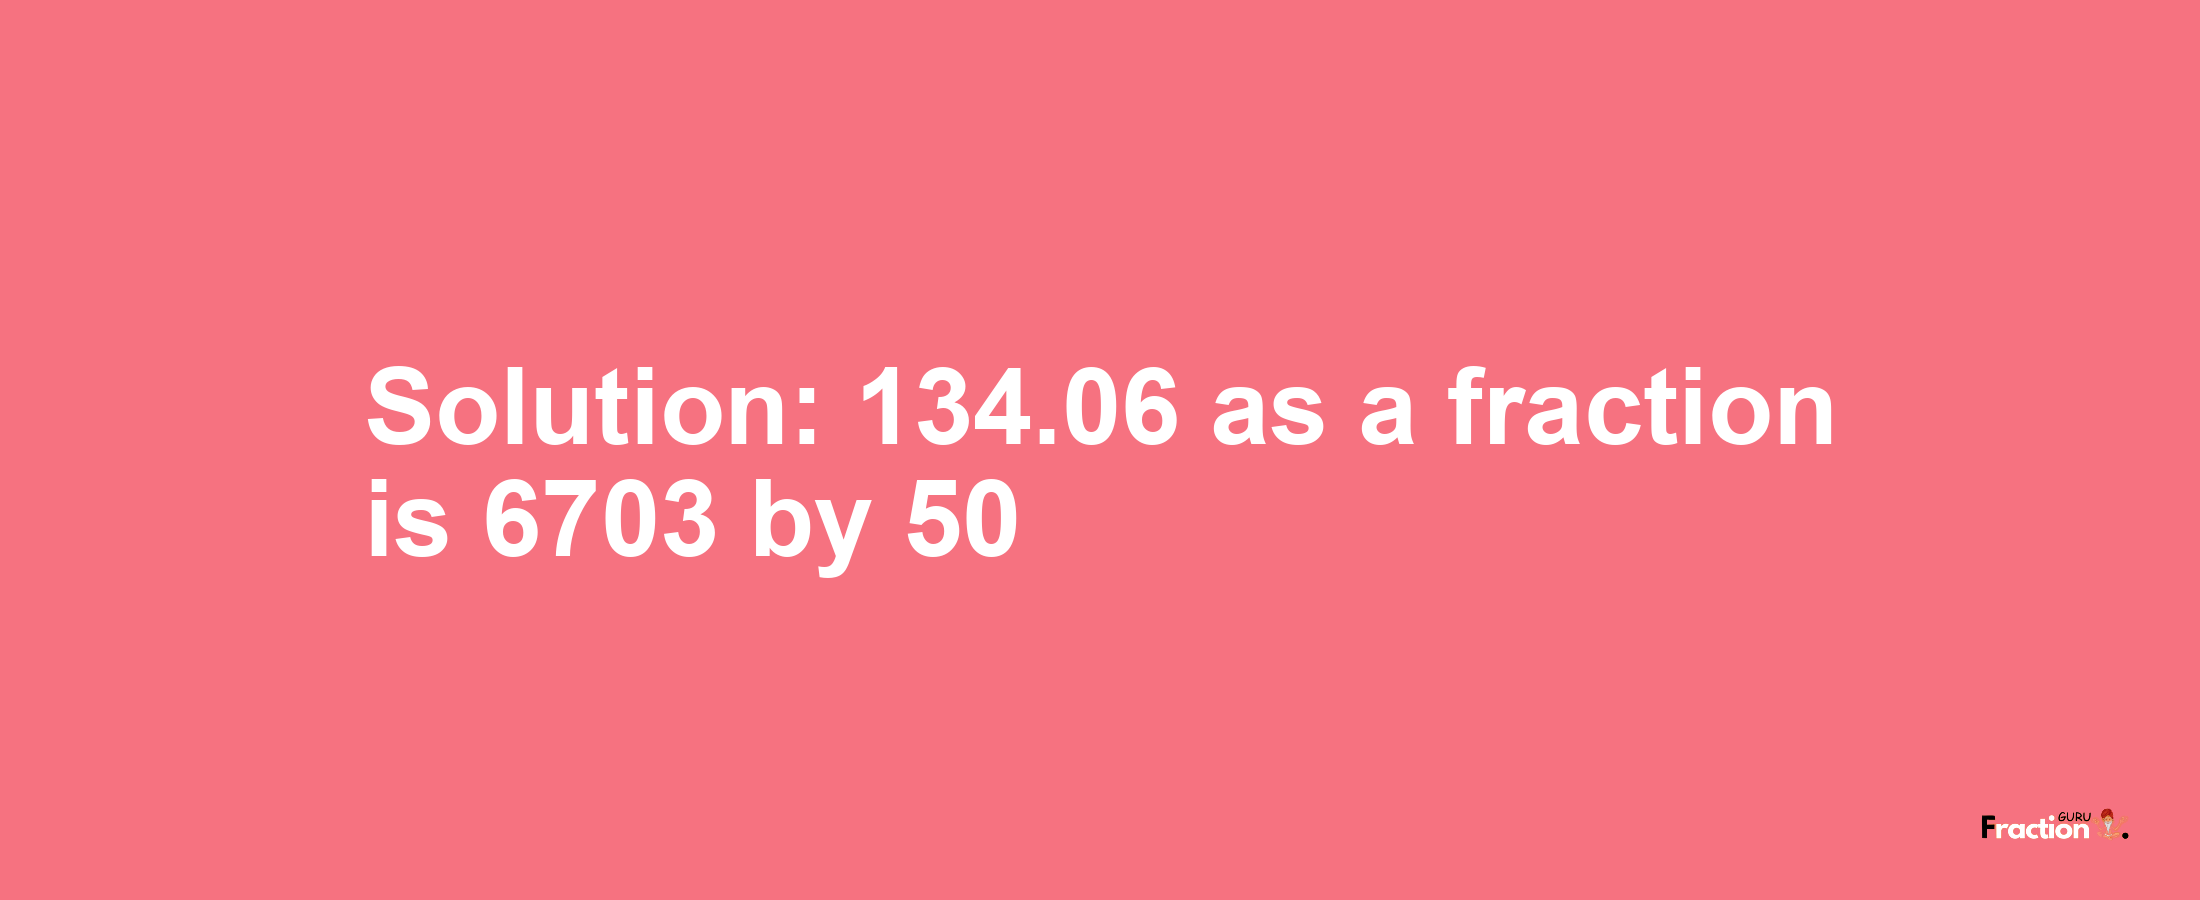 Solution:134.06 as a fraction is 6703/50